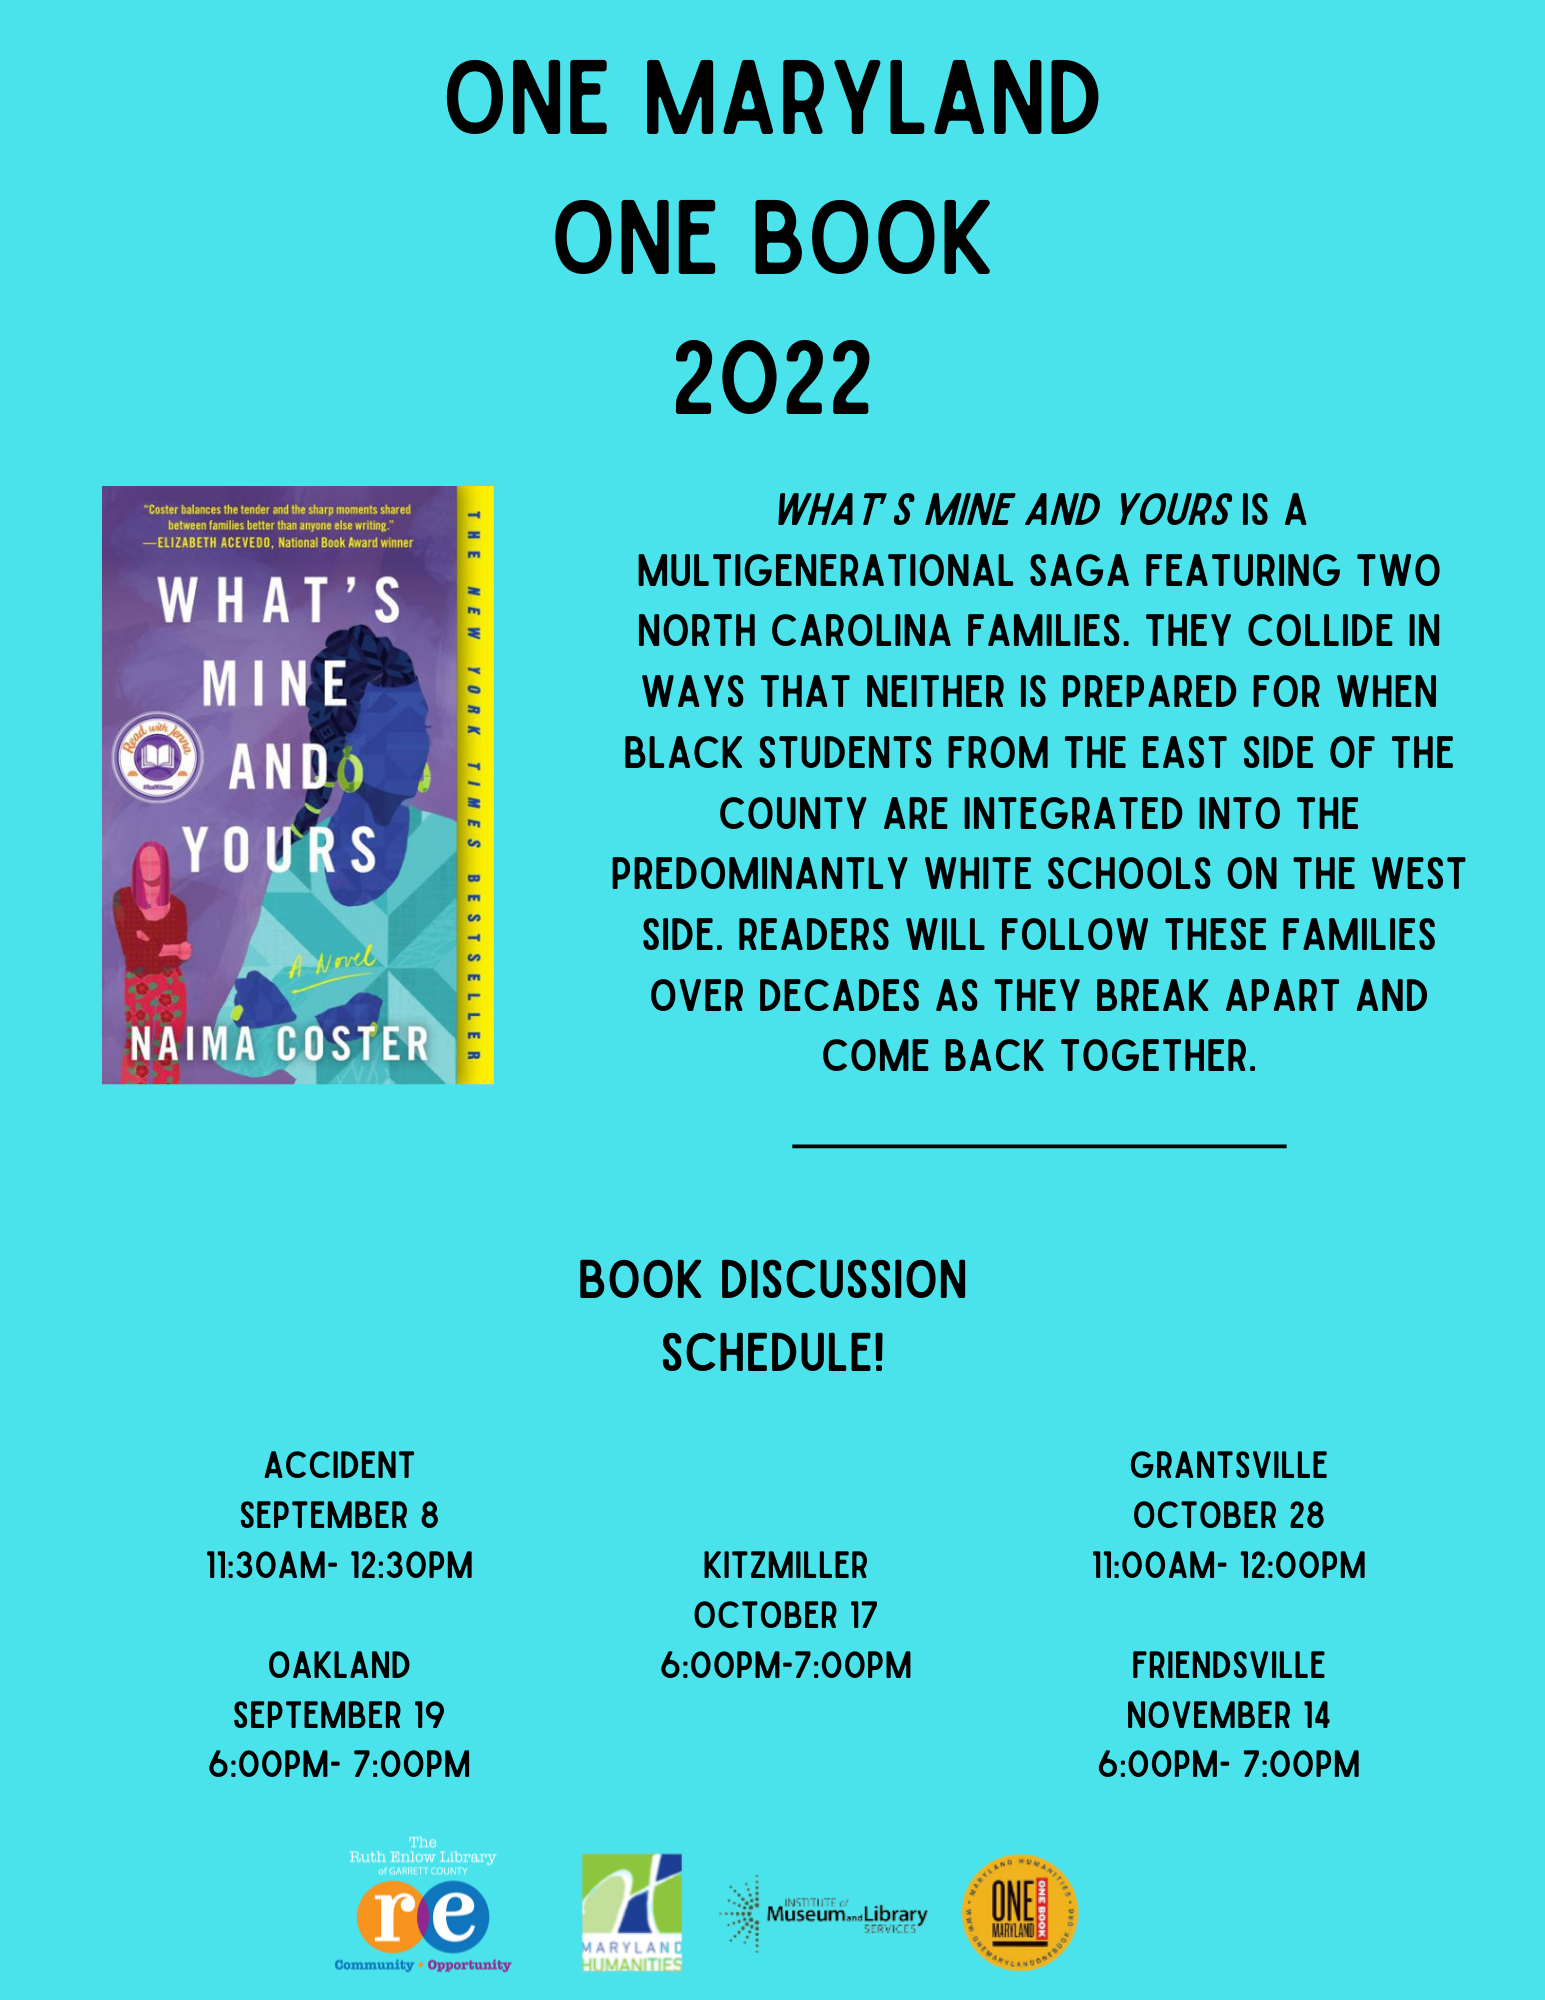 Flyer with information about the book and book discussion dates